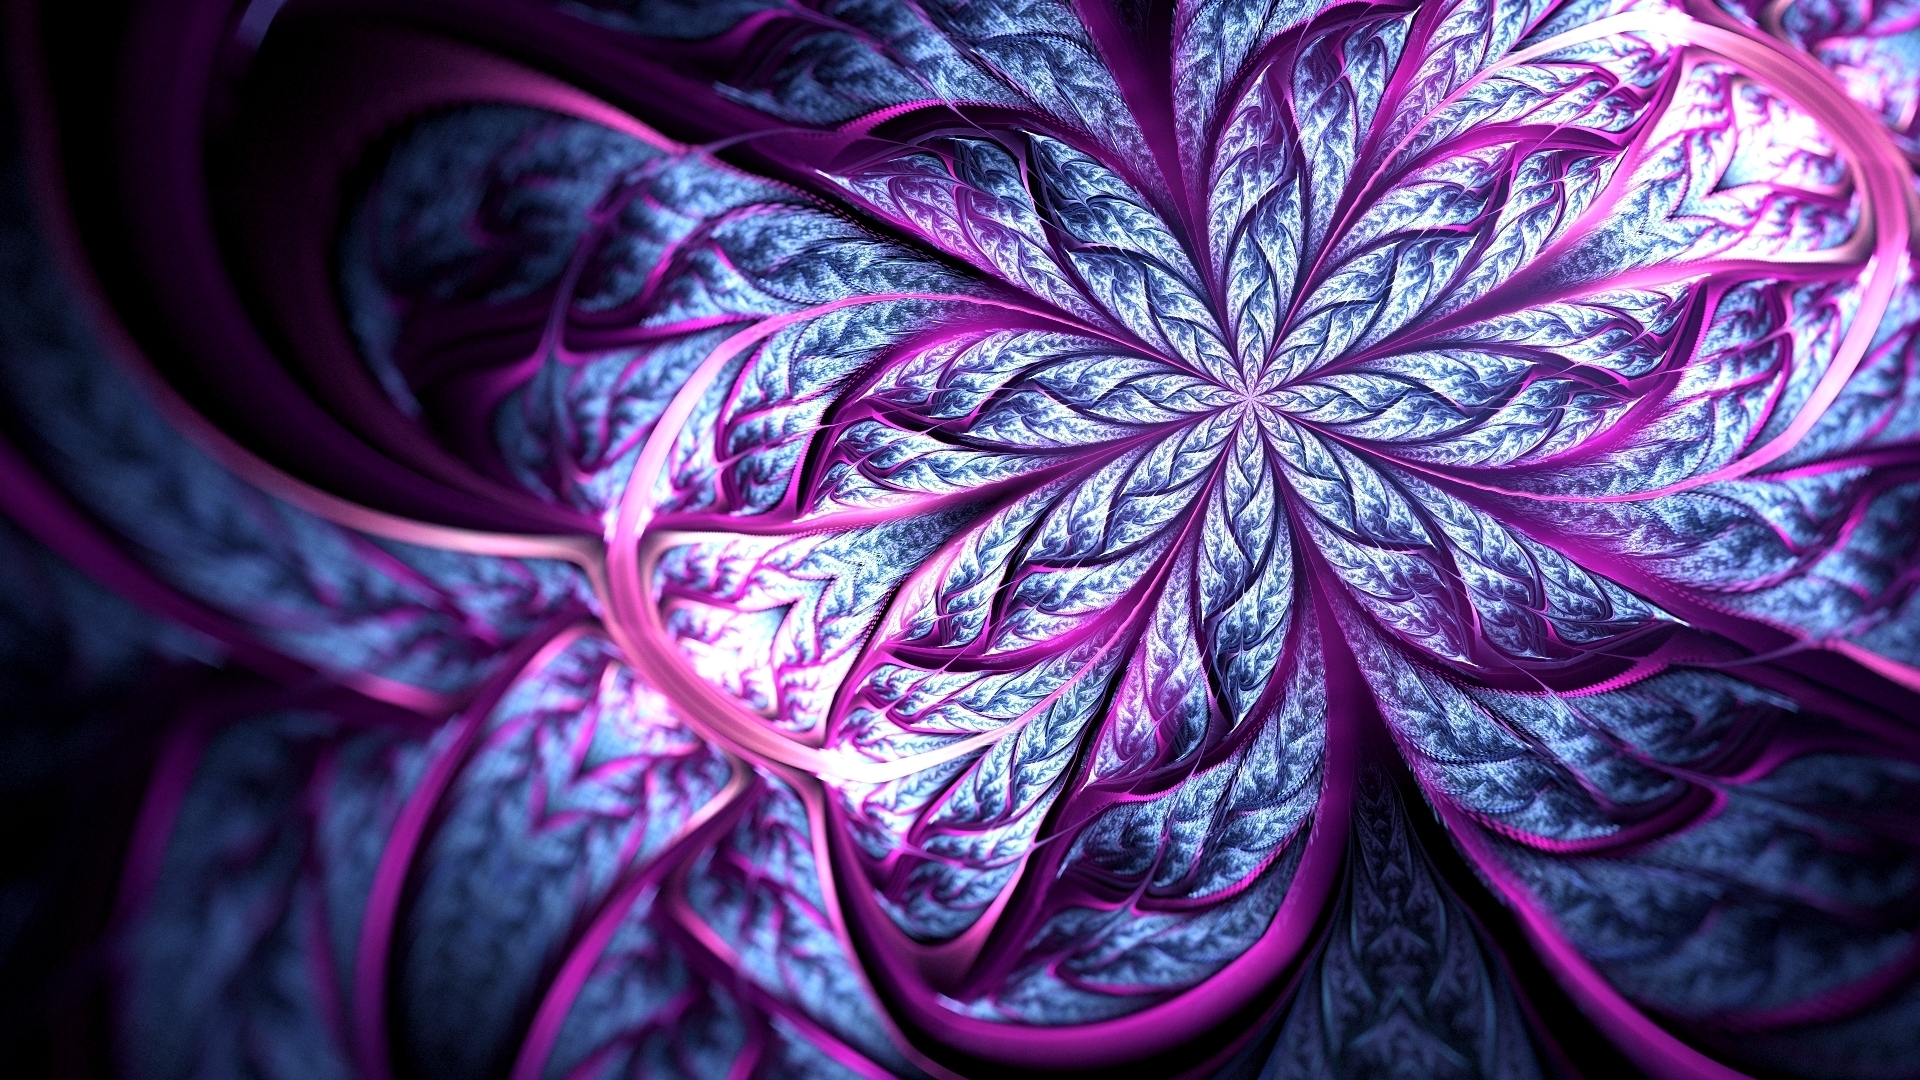 208 Trippy HD Wallpapers Backgrounds - Wallpaper Abyss -